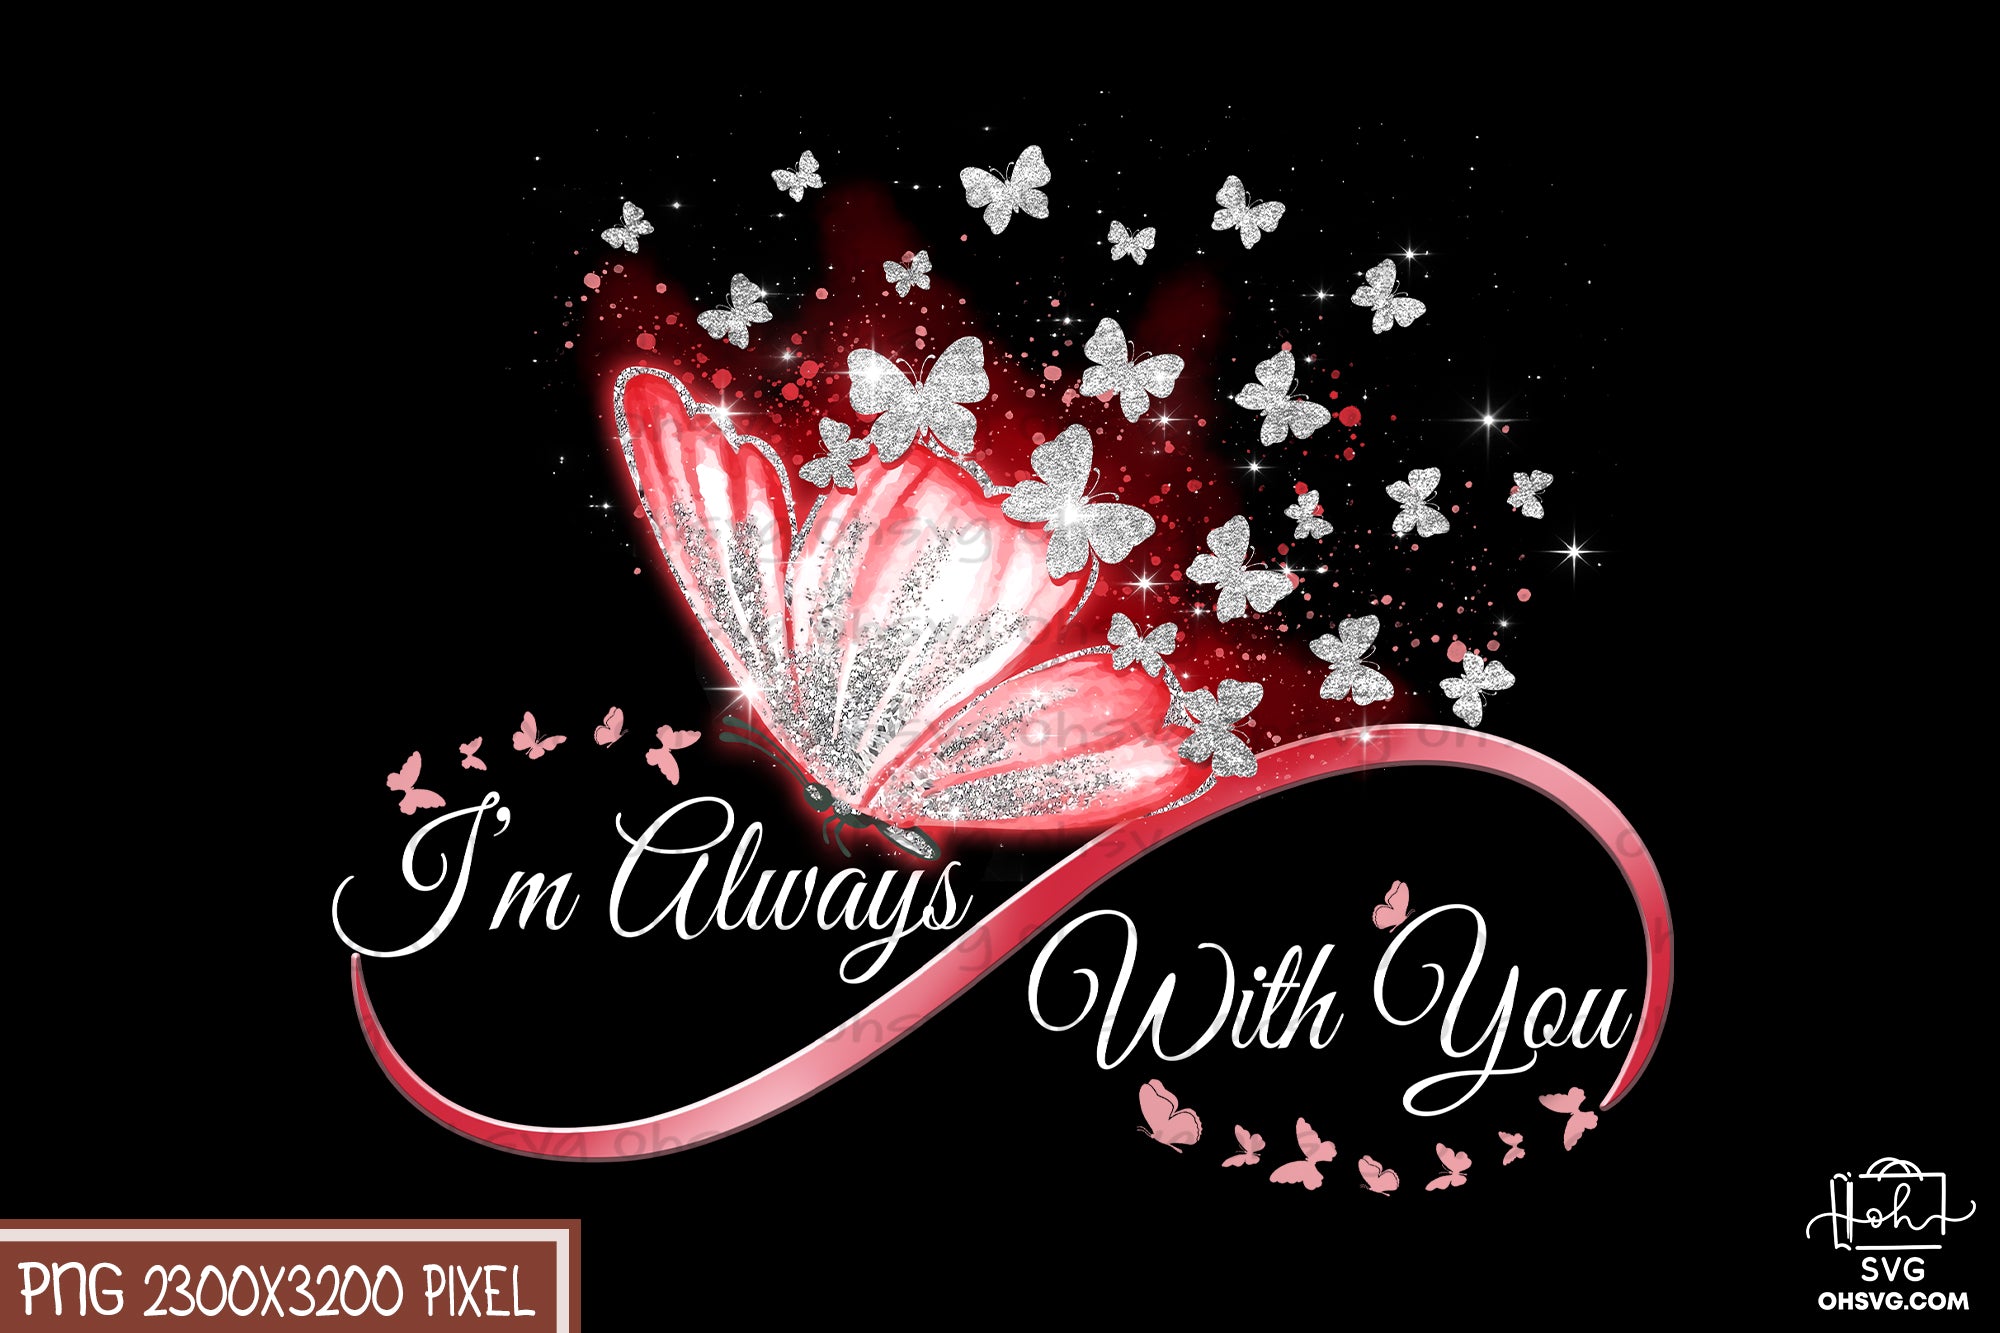 I'm Always With You PNG, Angel Wings PNG, Memorial PNG, Heaven PNG